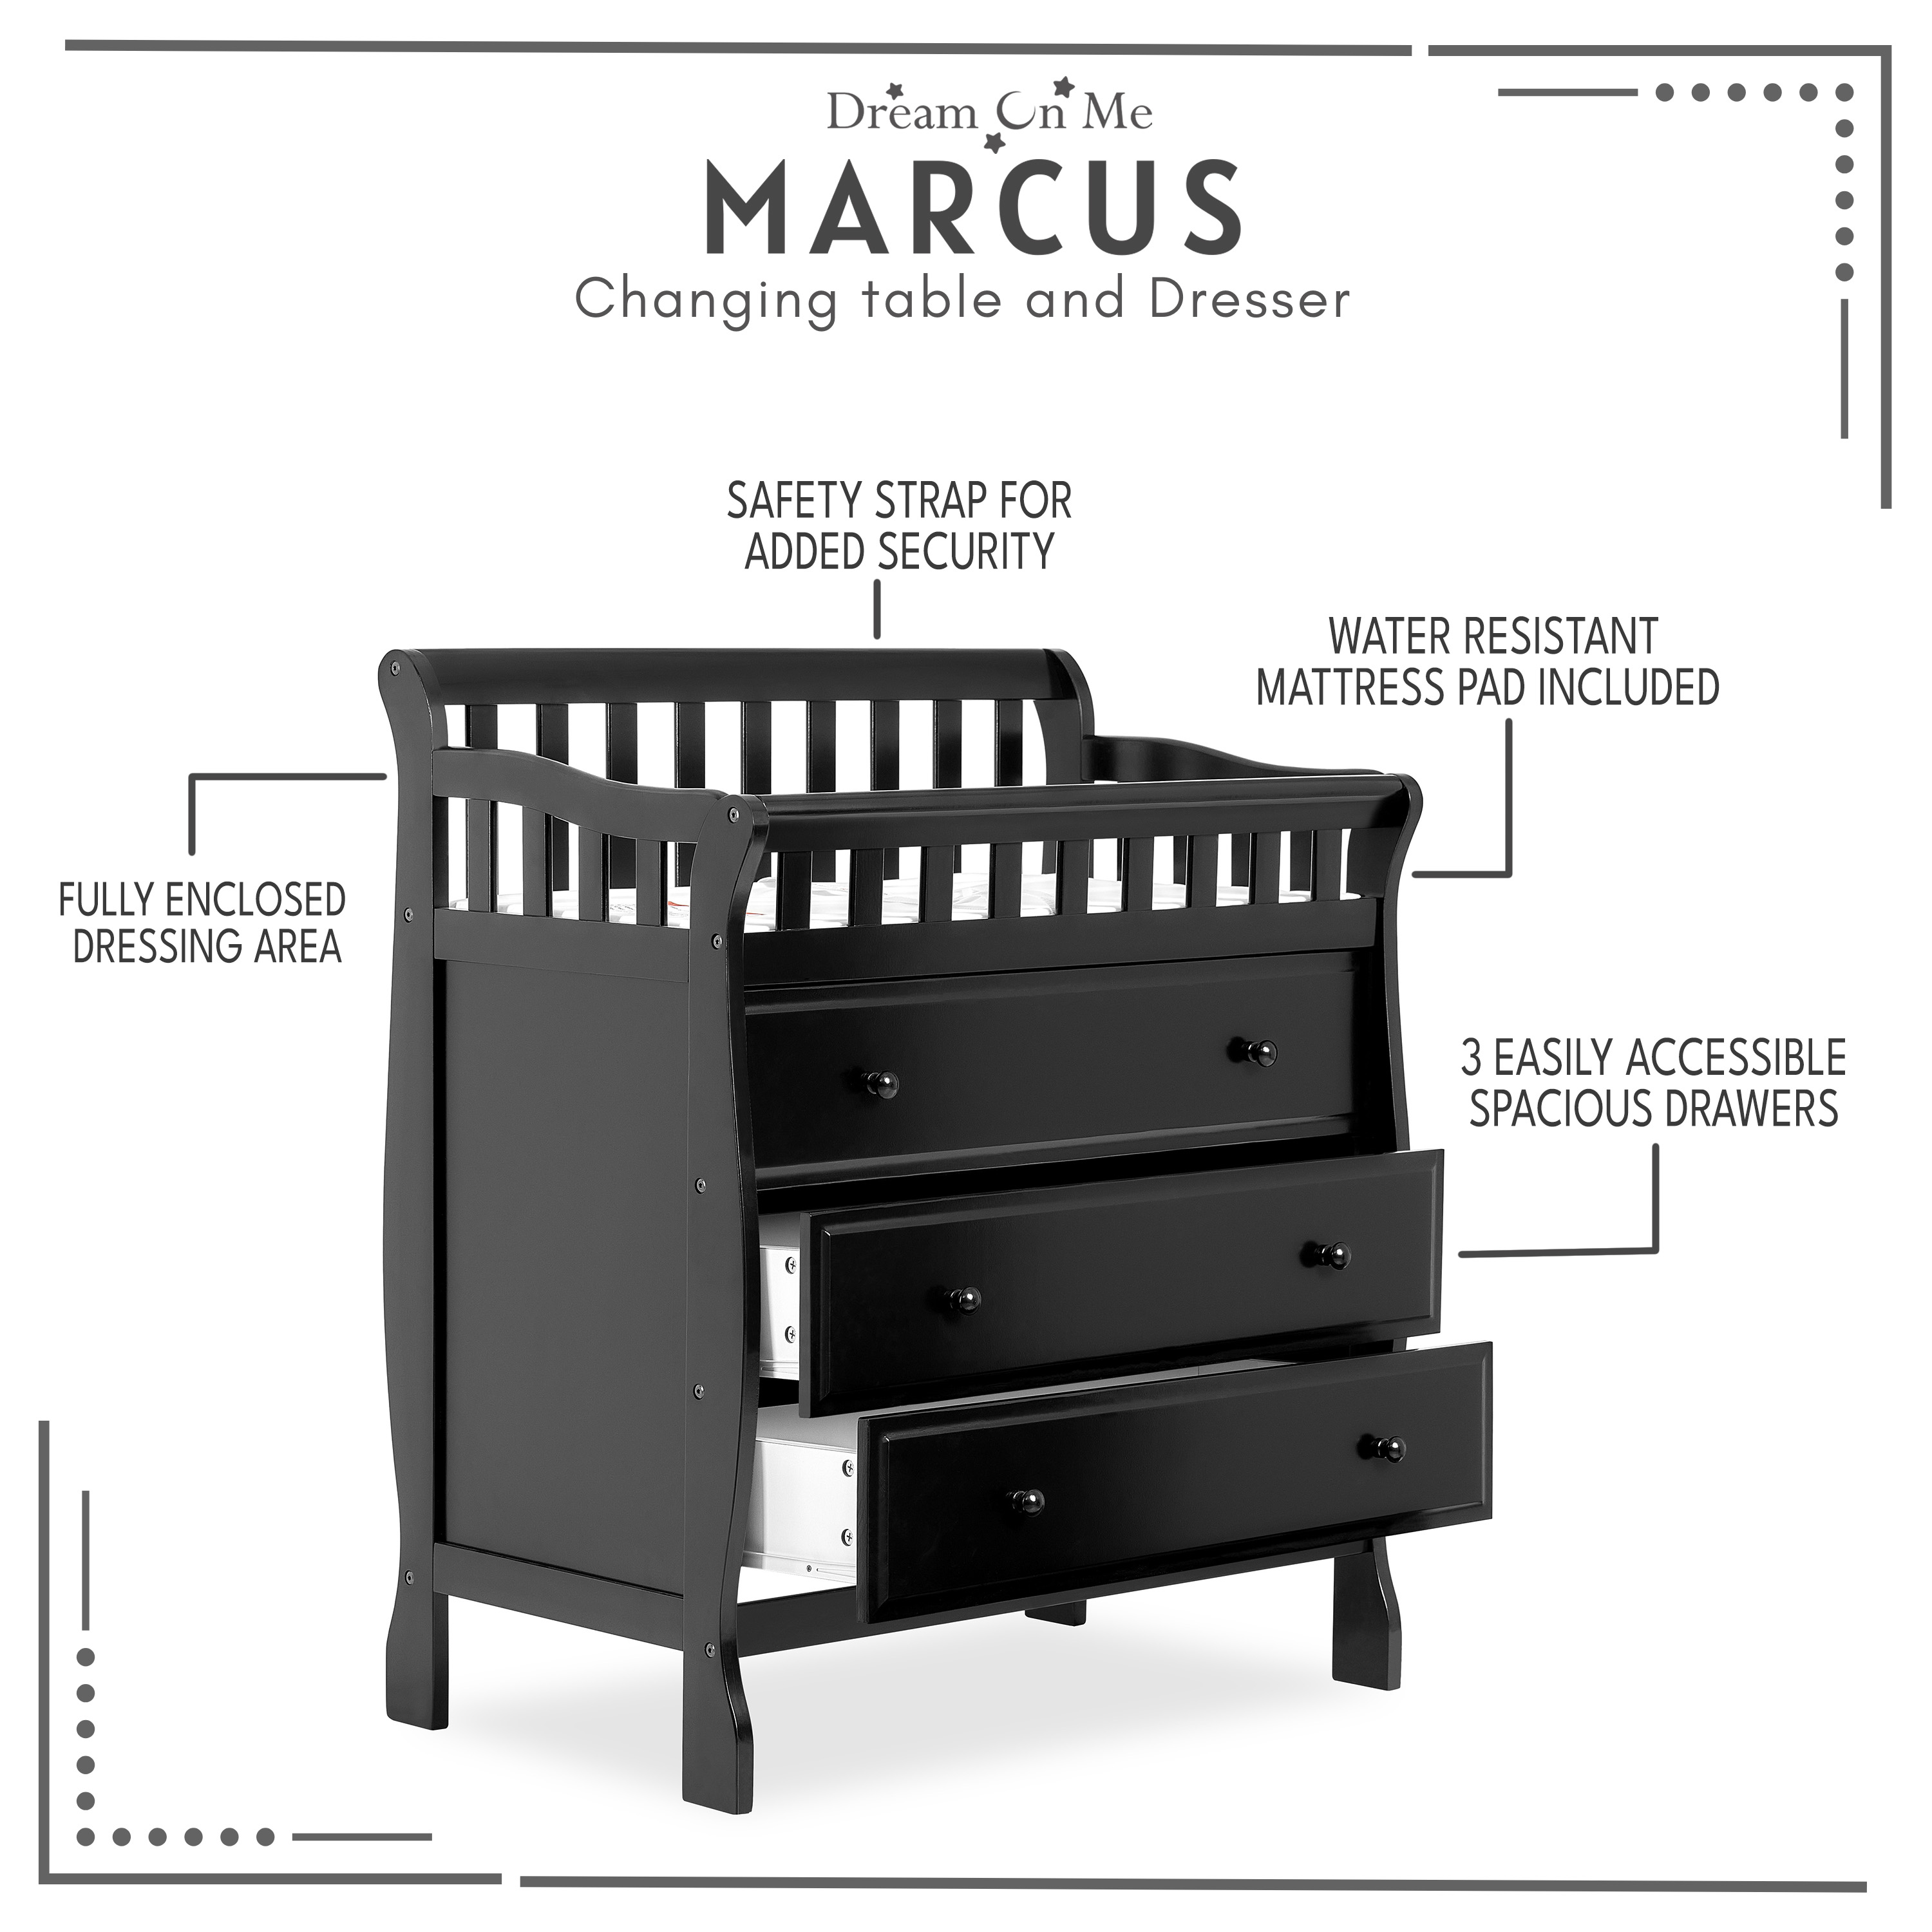 Dream On Me Marcus Changing Table And Dresser, Black - image 5 of 10